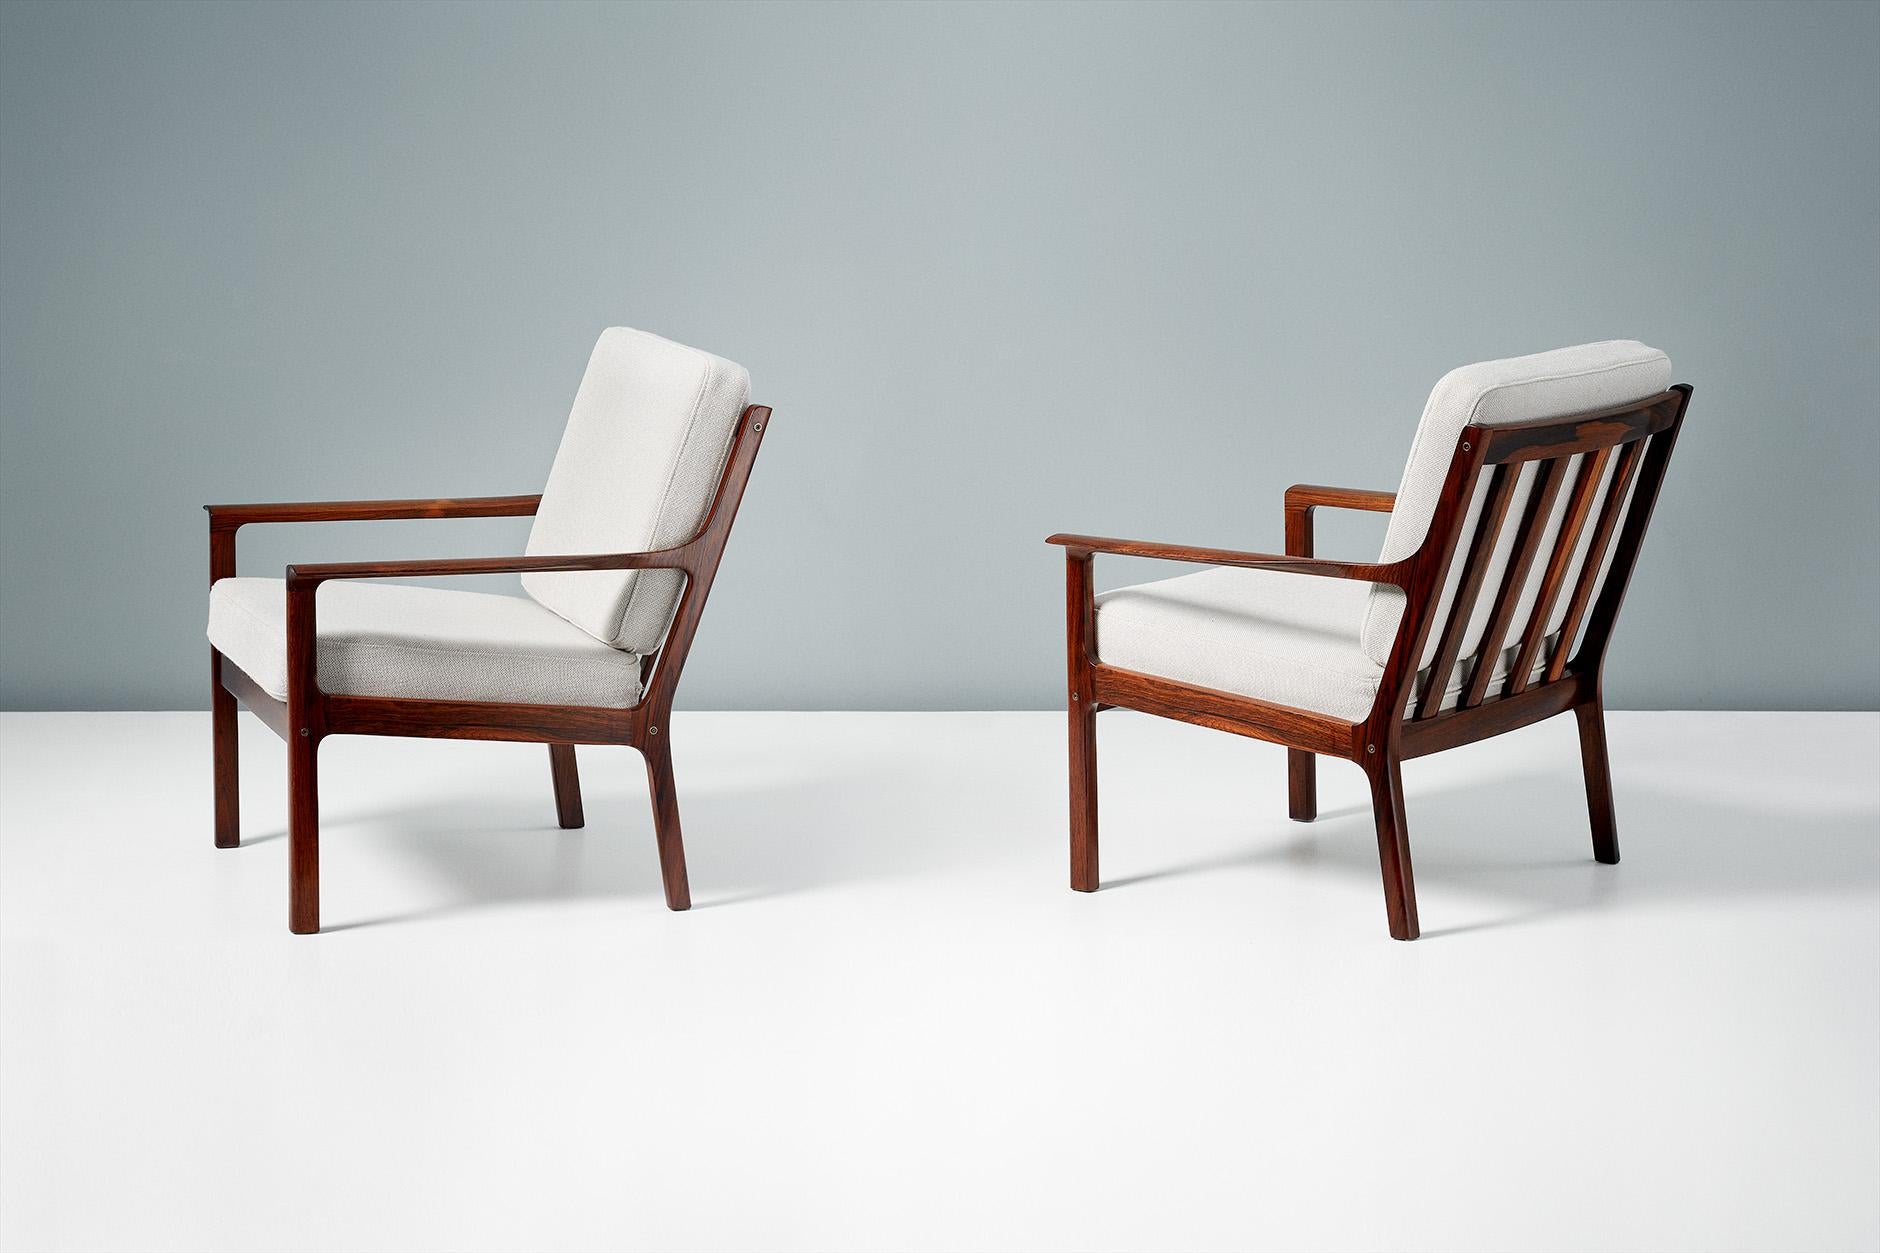 Fredrik Kayser

Model 935 lounge chairs

Produced by Vatne Mobler in Norway, circa 1960s. The frames are made from highly figured Brazilian rosewood. The new cushions are upholstered in Kvadrat wool fabric. 

Measures: W 69cm / D 71cm / H 79cm.